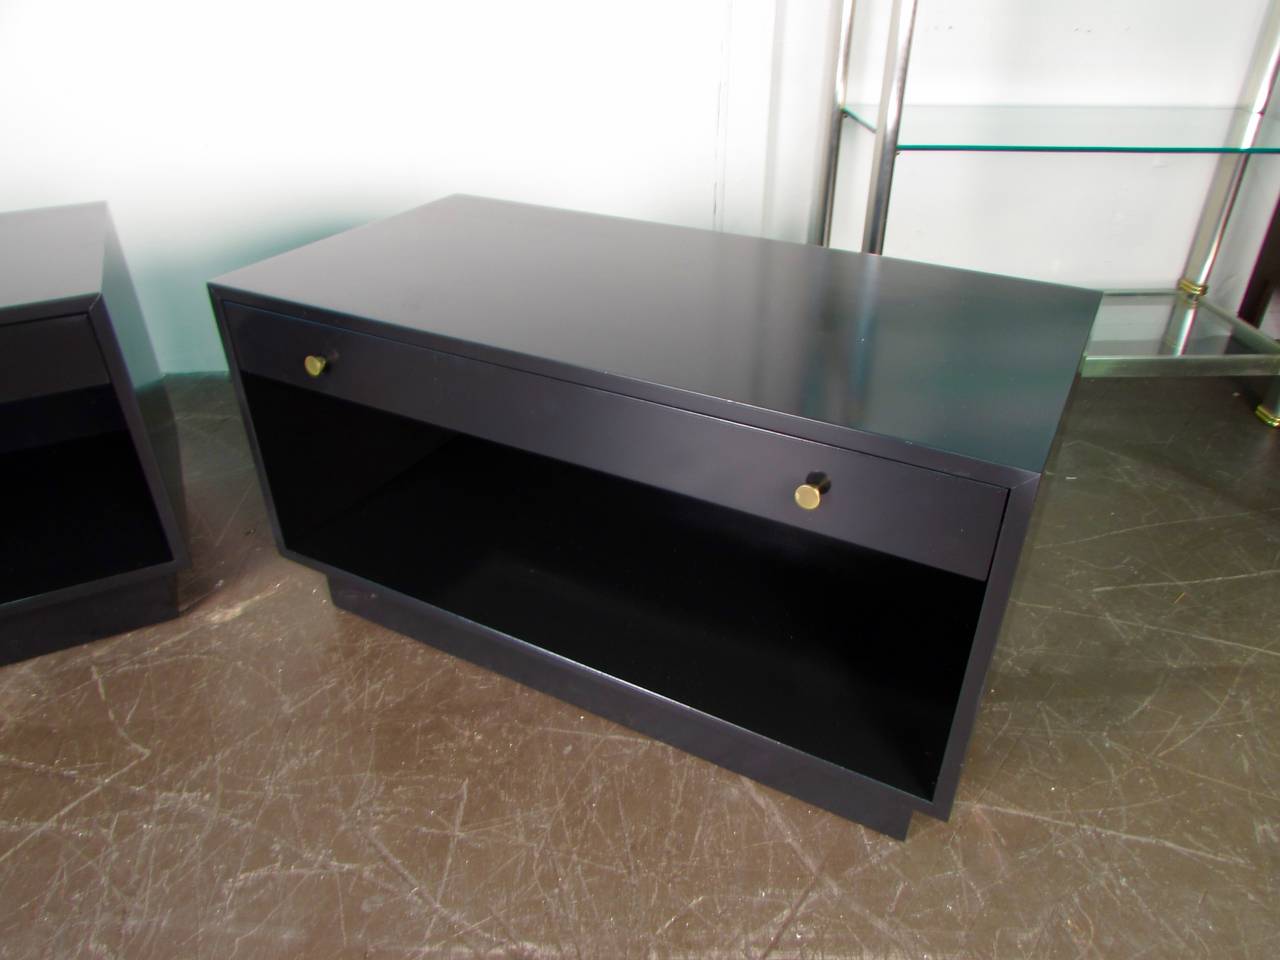 Handsome Pair of Lacquered End Tables or Night Stand by Harvey Probber Studio, 1965. Turned brass pulls. Newly refinished. These pieces were in use by the original owner as night stands. 

Clearance in bottom storage is 10.5